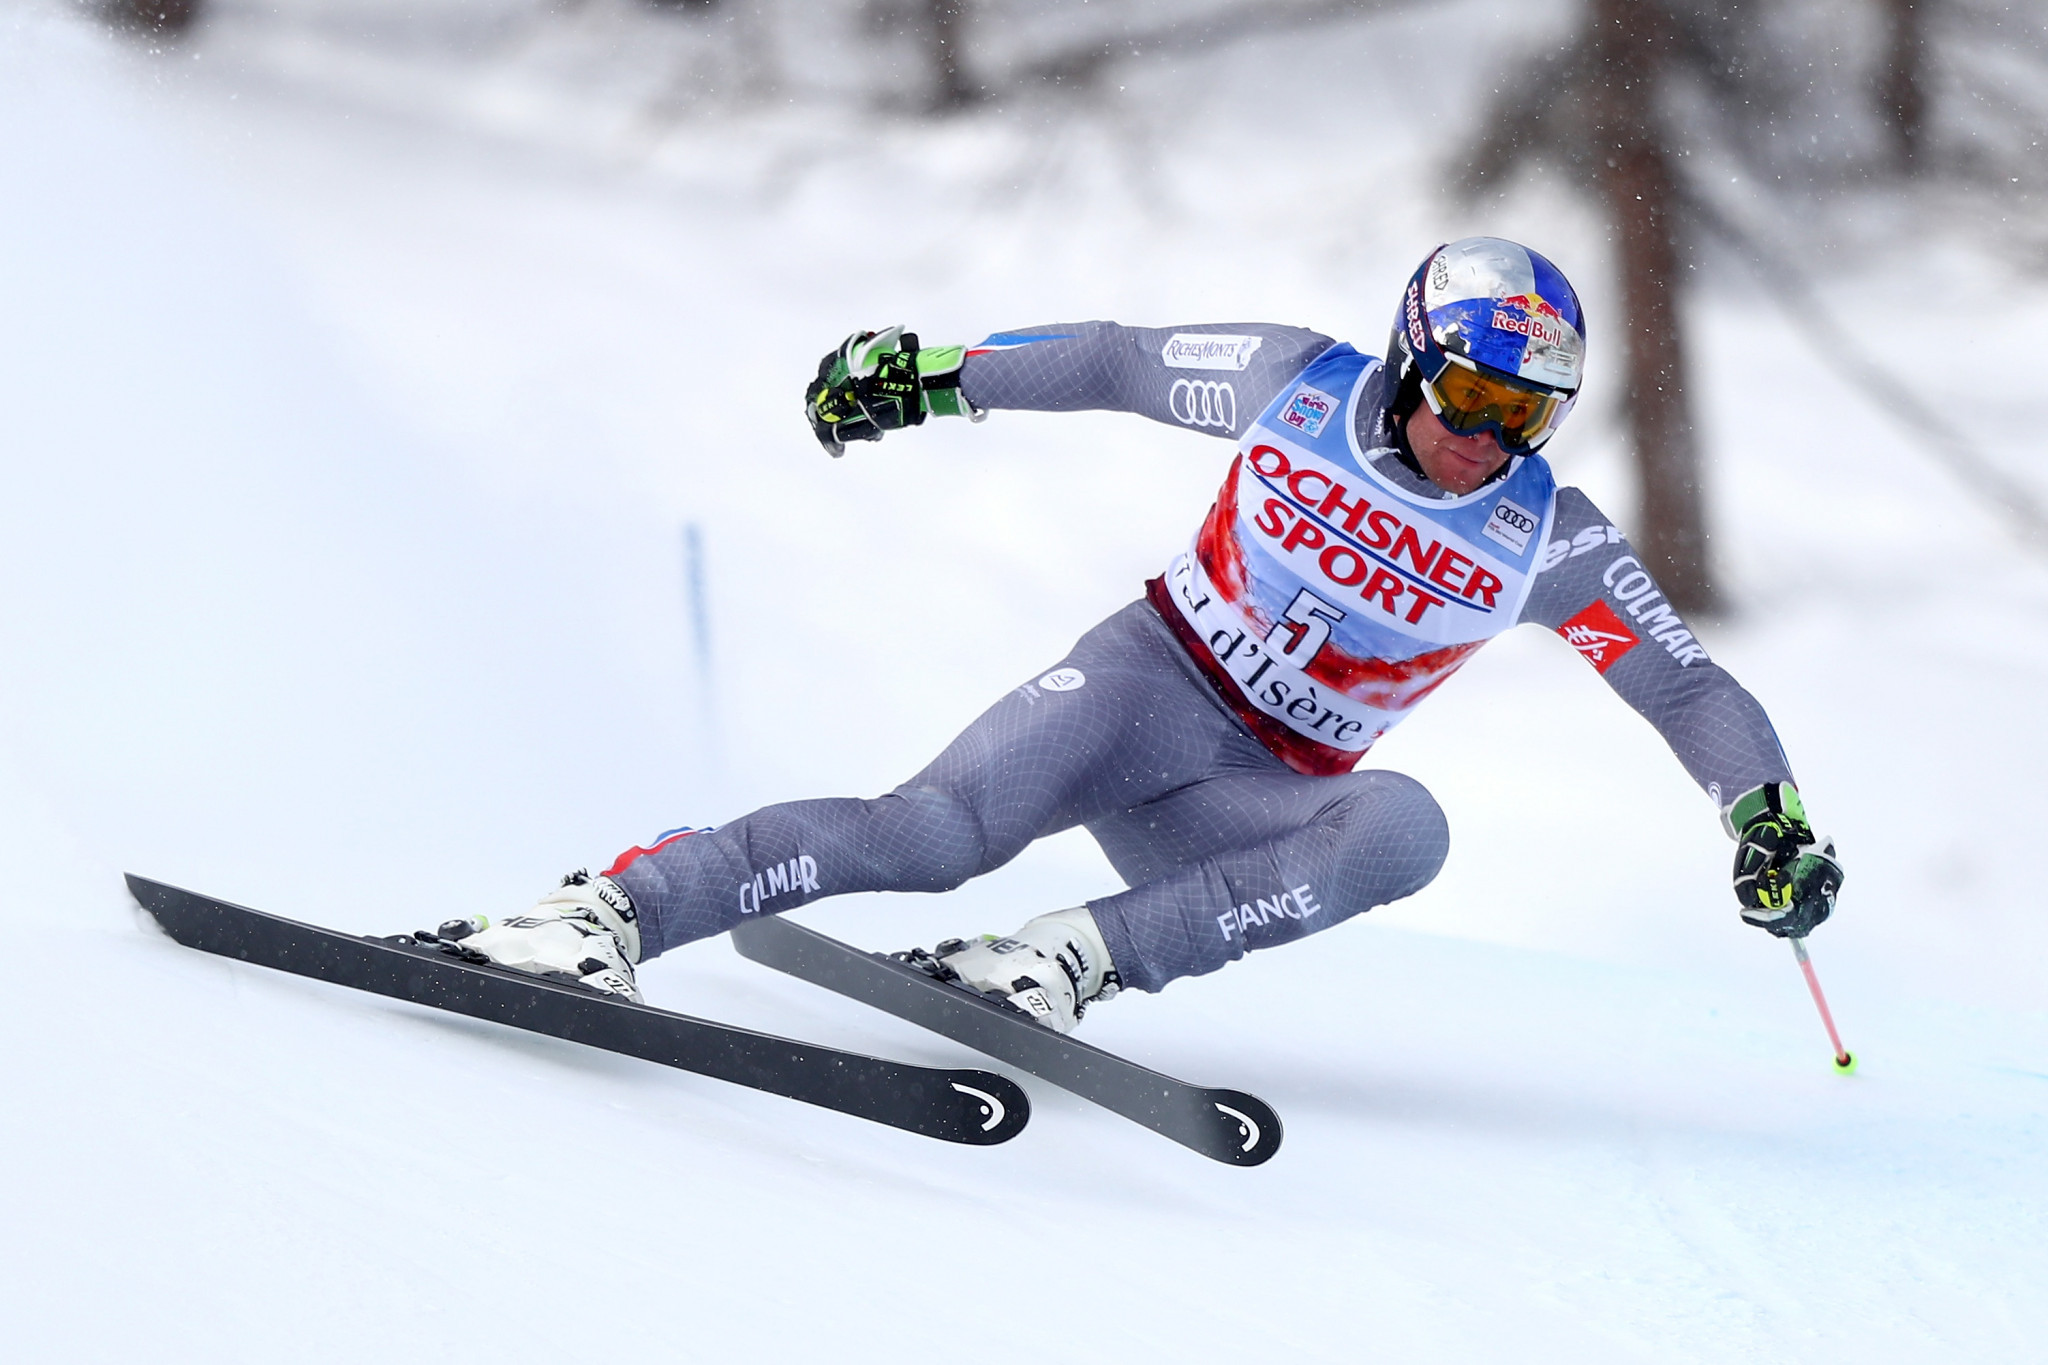 Pinturault wins giant slalom at FIS Alpine Ski World Cup after Hirscher gets himself in a tangle